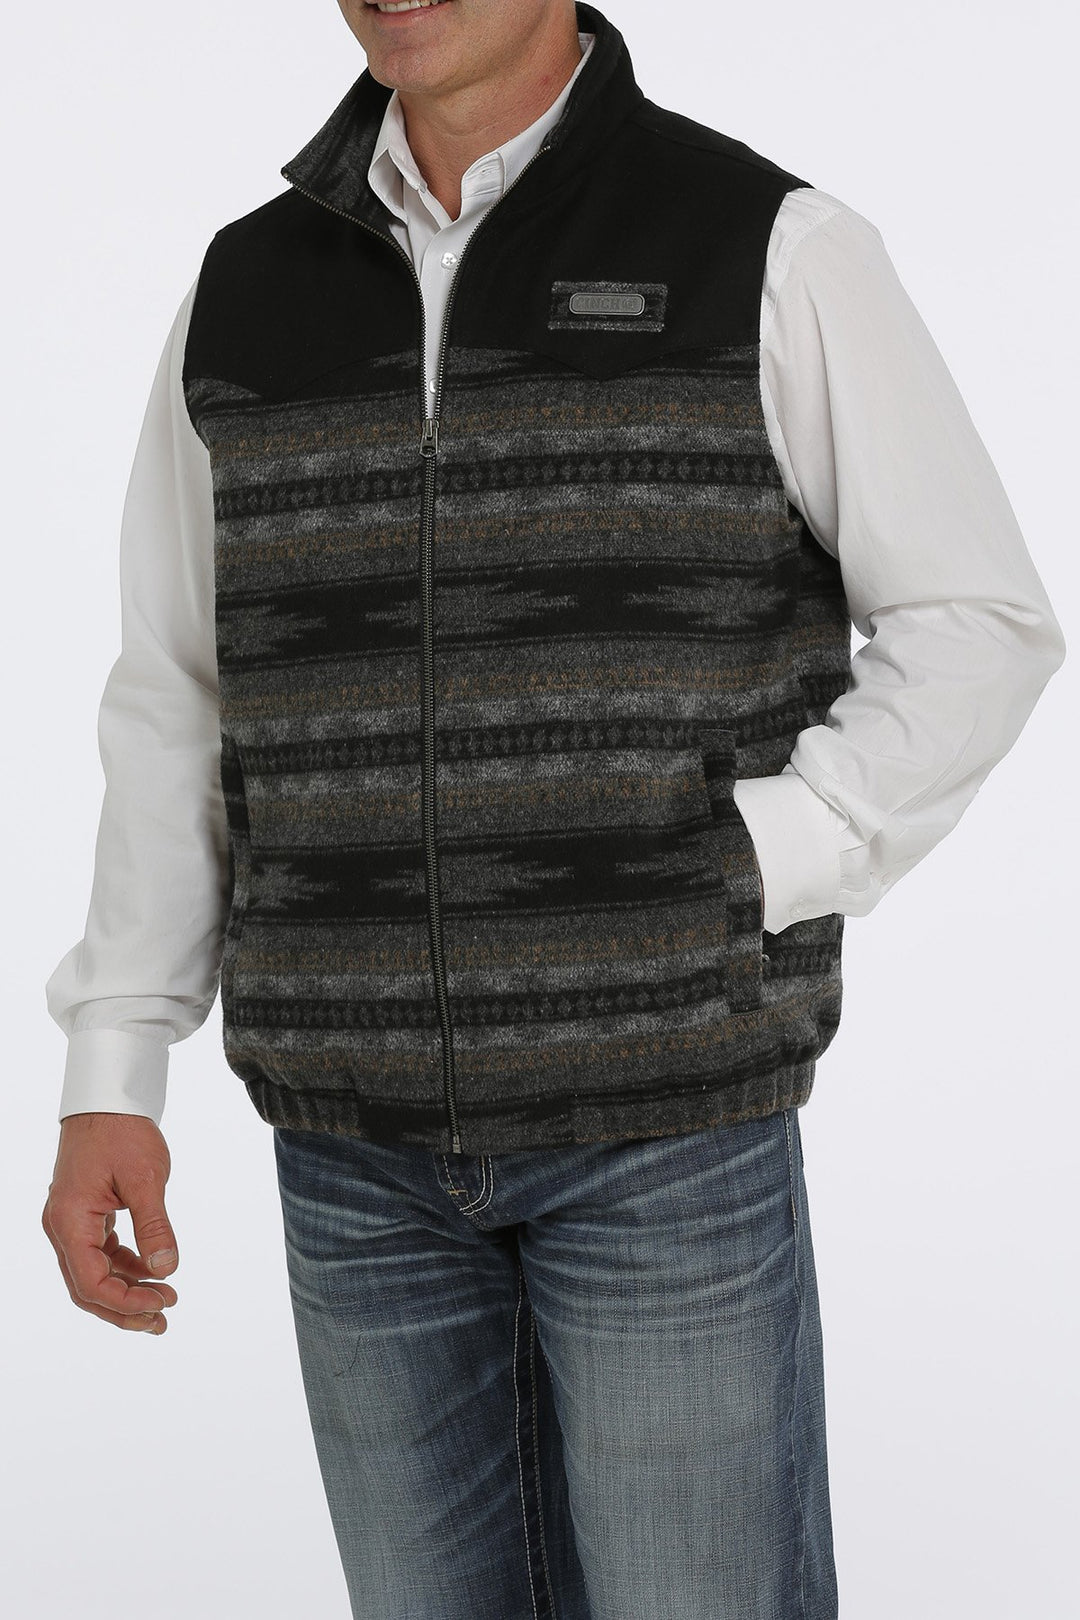 Cinch Men's Black and Gray Wooly Concealed Carry Vest